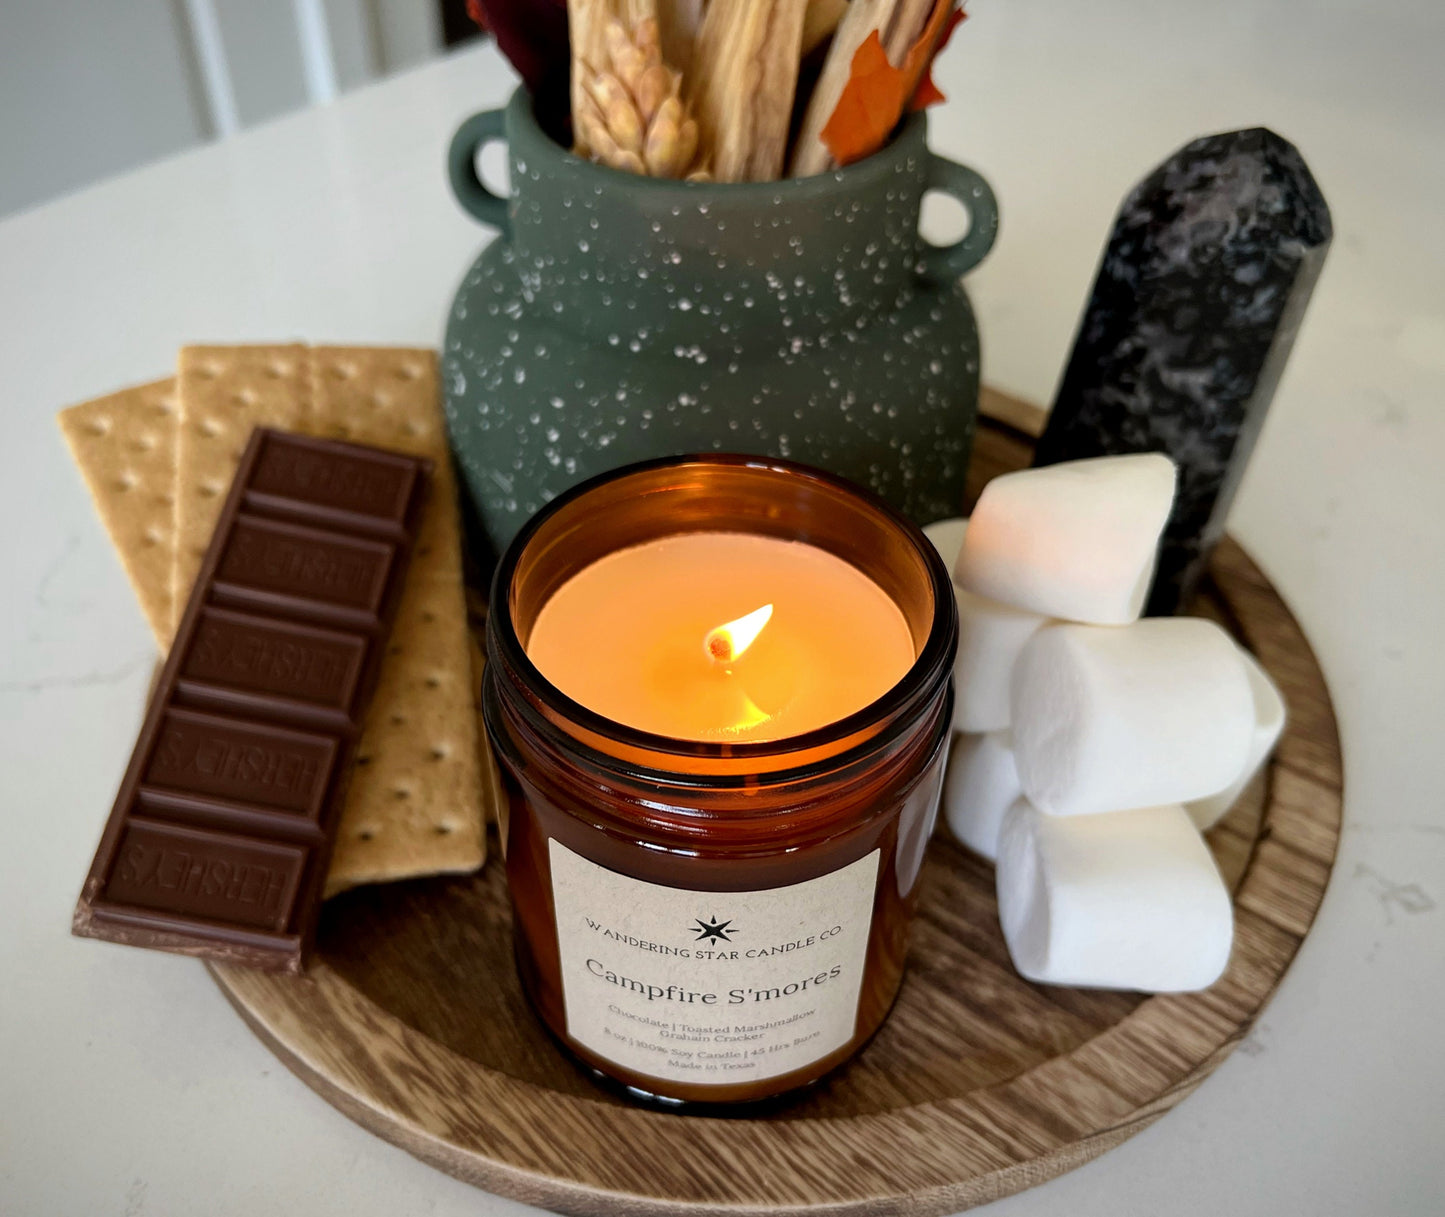 Campfire S'mores | Fall Winter Candles | Sweet Scented Candles | Camping Hiking Gifts | Outdoorsy Candles | Made in Texas | Holiday Gifts